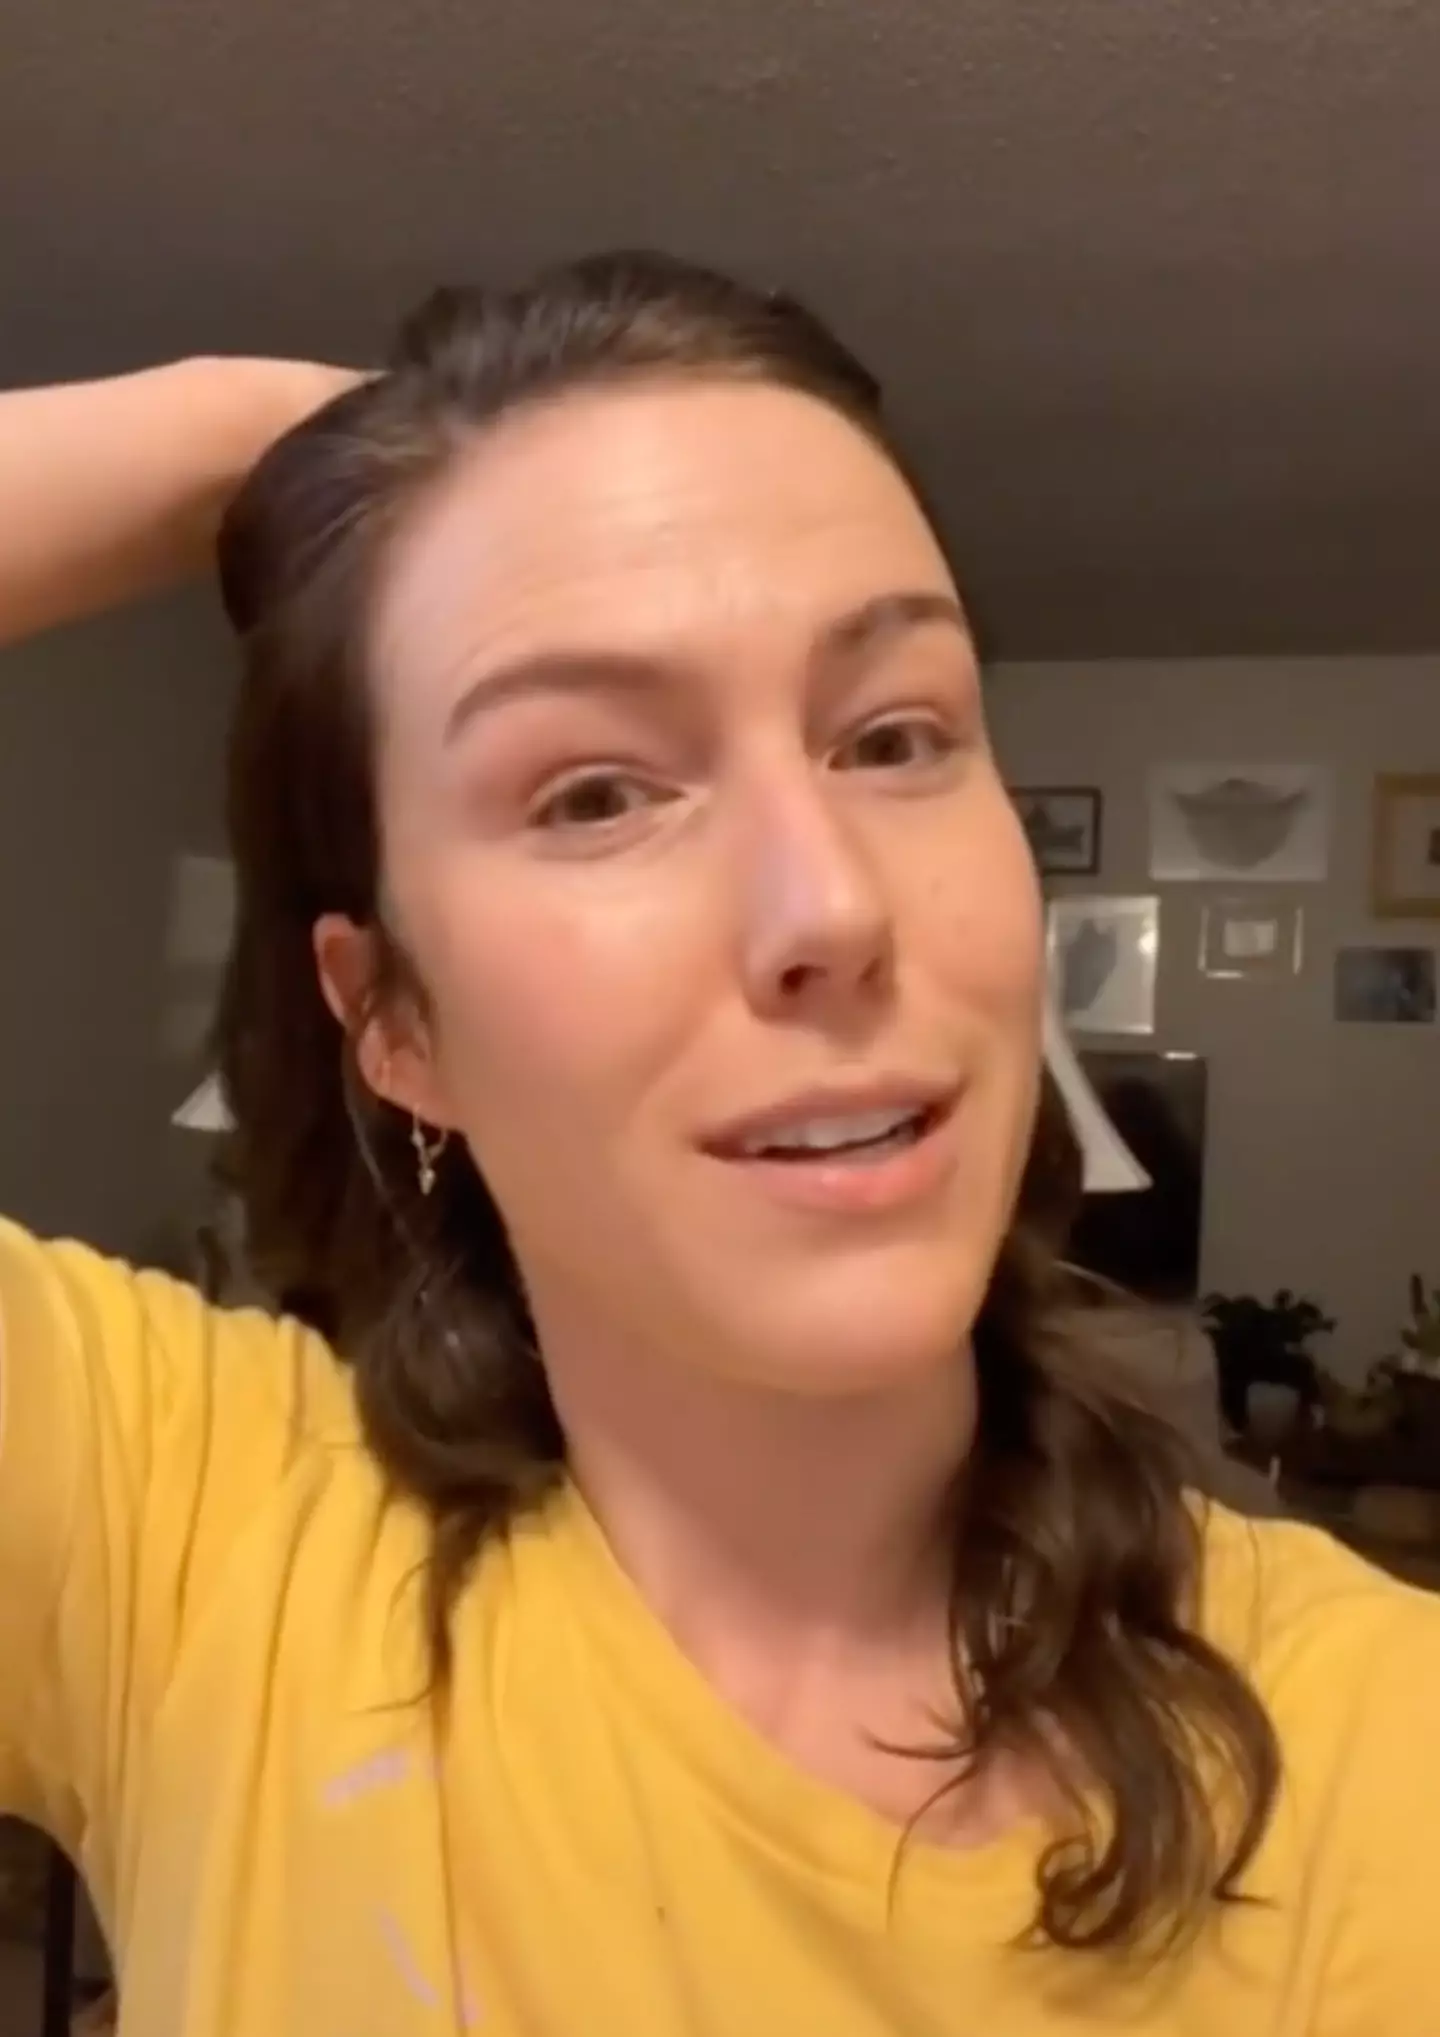 TikTok users were thrilled when they read Kyra's message. (